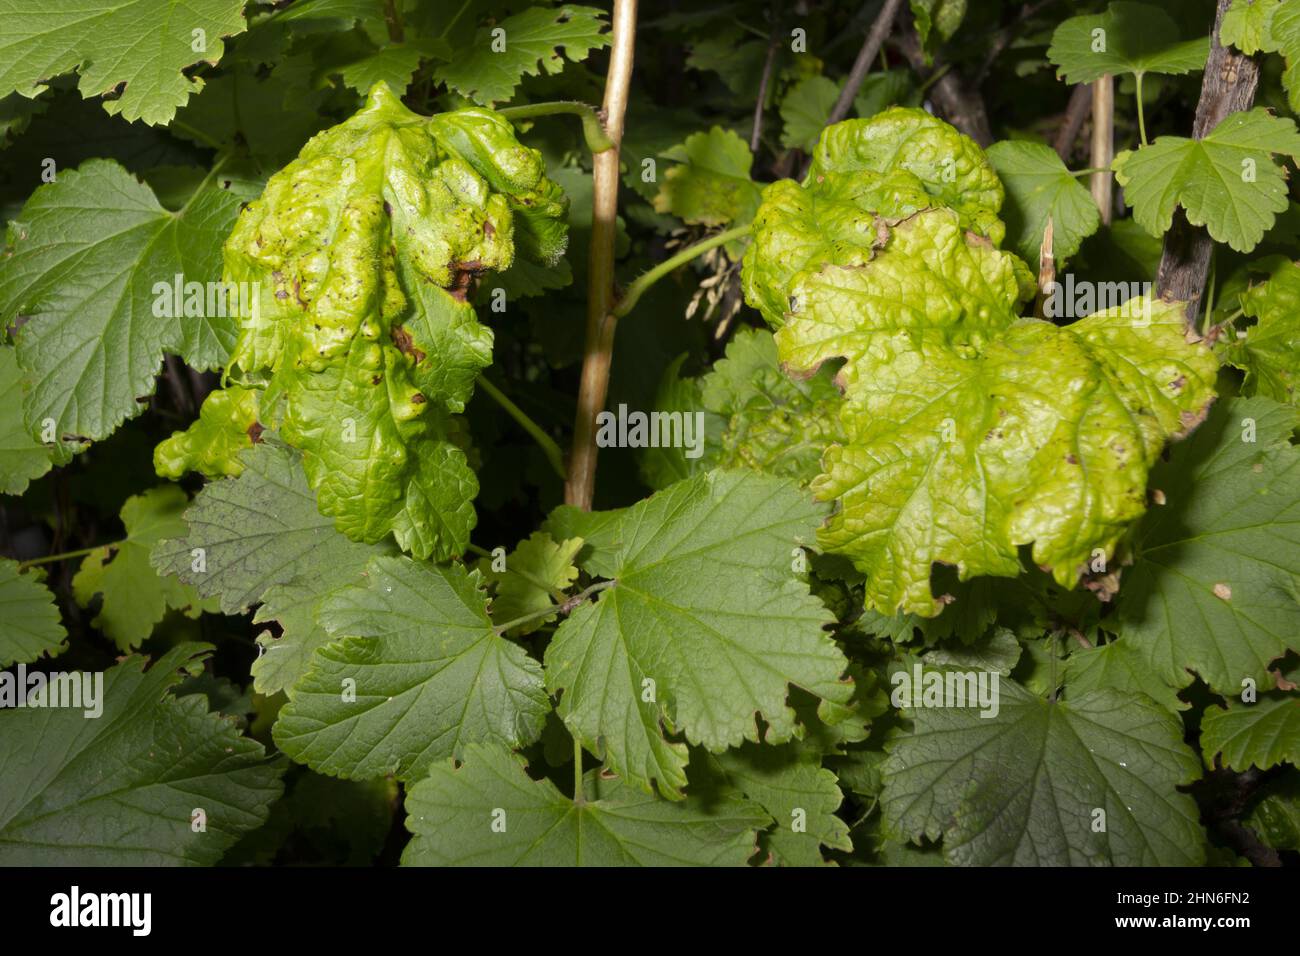 Cecidomyiidae disease and currant pests gall midges and catocha. The concept of combating diseases and pests of agricultural cultivated plants. Stock Photo